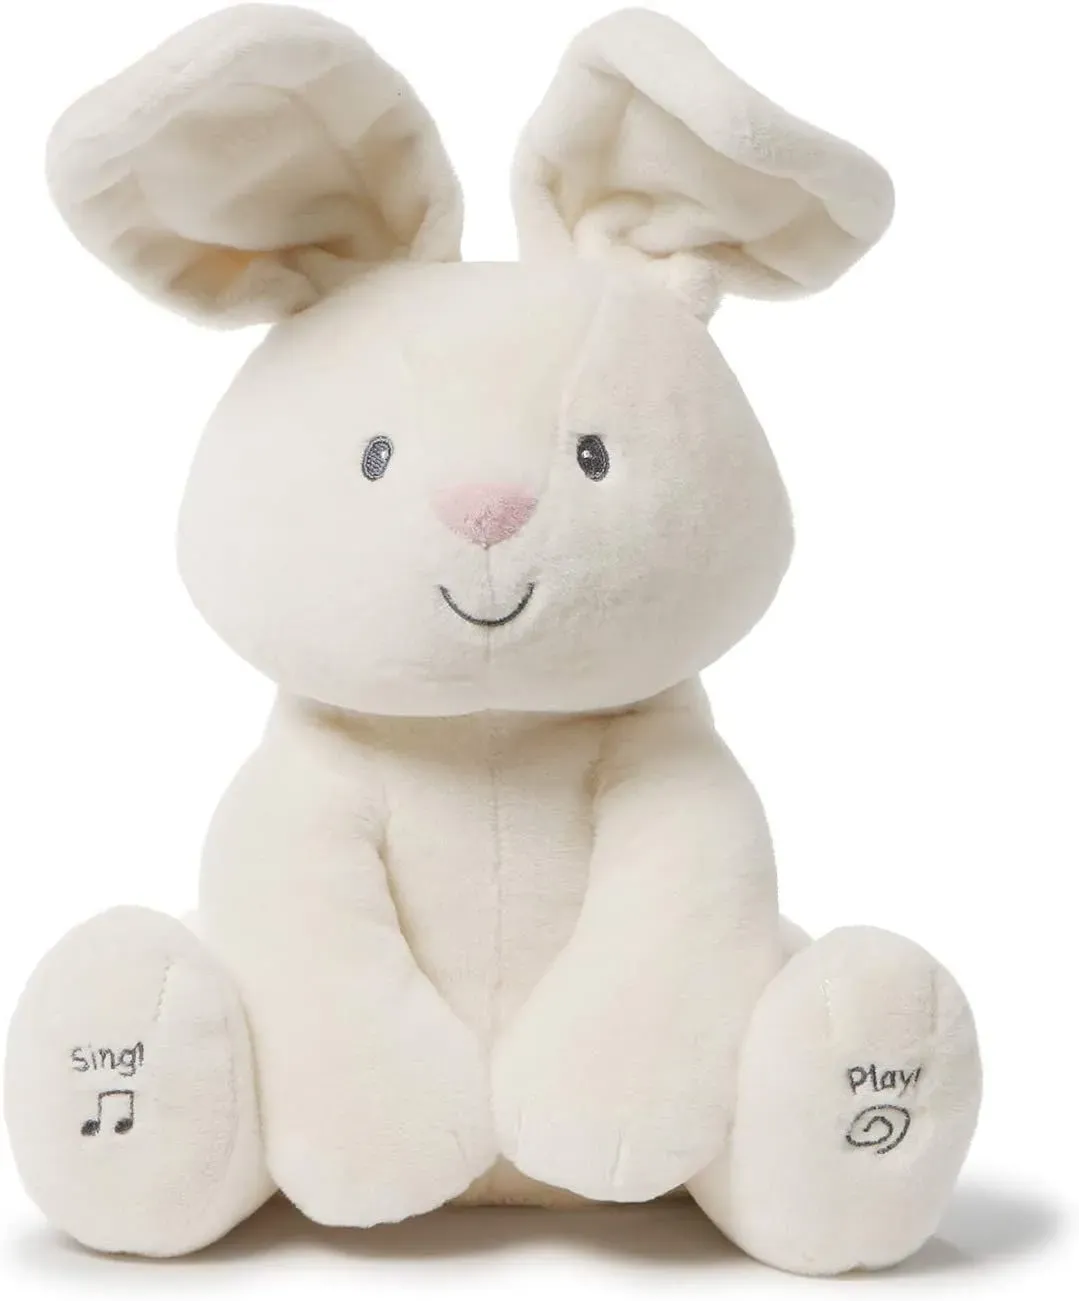 A sweet and smiling animated bunny best for toddlers.